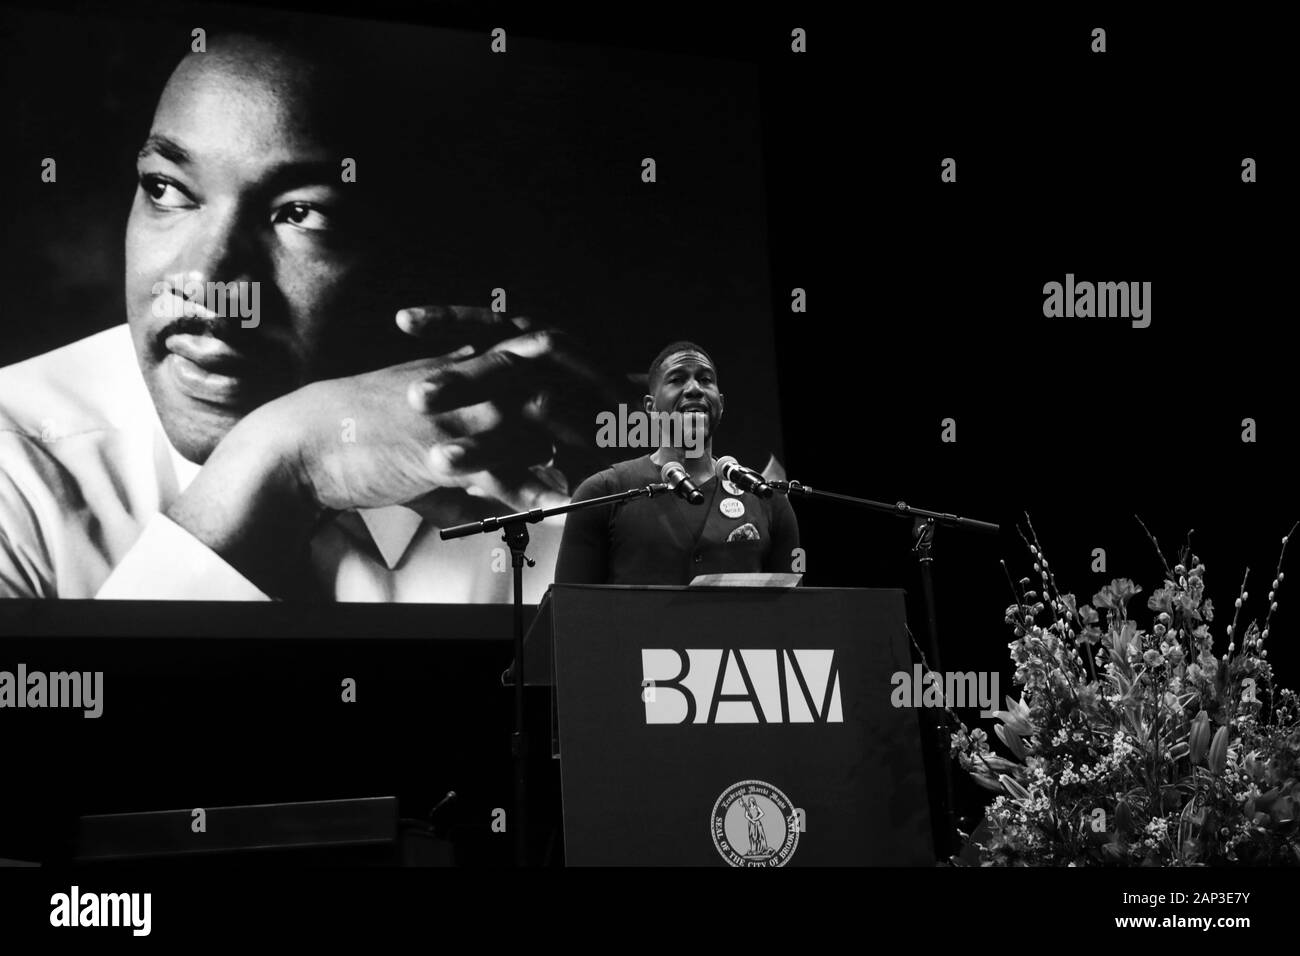 New York, New York, USA. 20th Jan, 2020. New K City Public Advocate Jurmanee Williams attends the 34th Brooklyn Tribute to Rev. Dr. Martin Luther King, Jr. held at BAM Howard Gilman Opera House on January 20, 2020 in the Brooklyn section of New York City. Credit: Mpi43/Media Punch/Alamy Live News Stock Photo